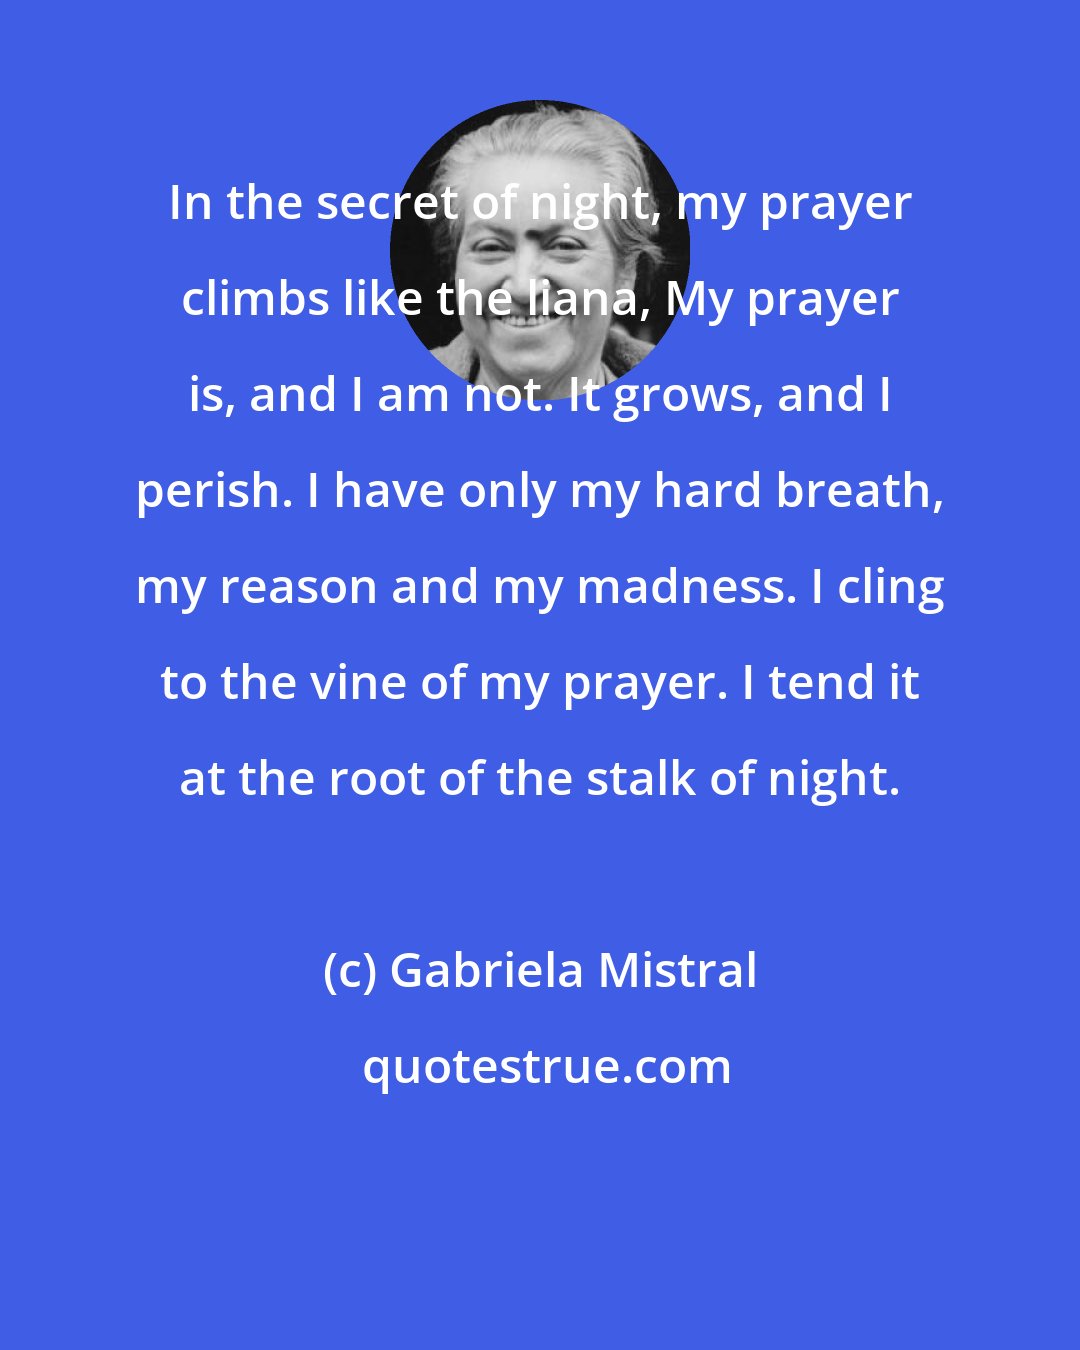 Gabriela Mistral: In the secret of night, my prayer climbs like the liana, My prayer is, and I am not. It grows, and I perish. I have only my hard breath, my reason and my madness. I cling to the vine of my prayer. I tend it at the root of the stalk of night.